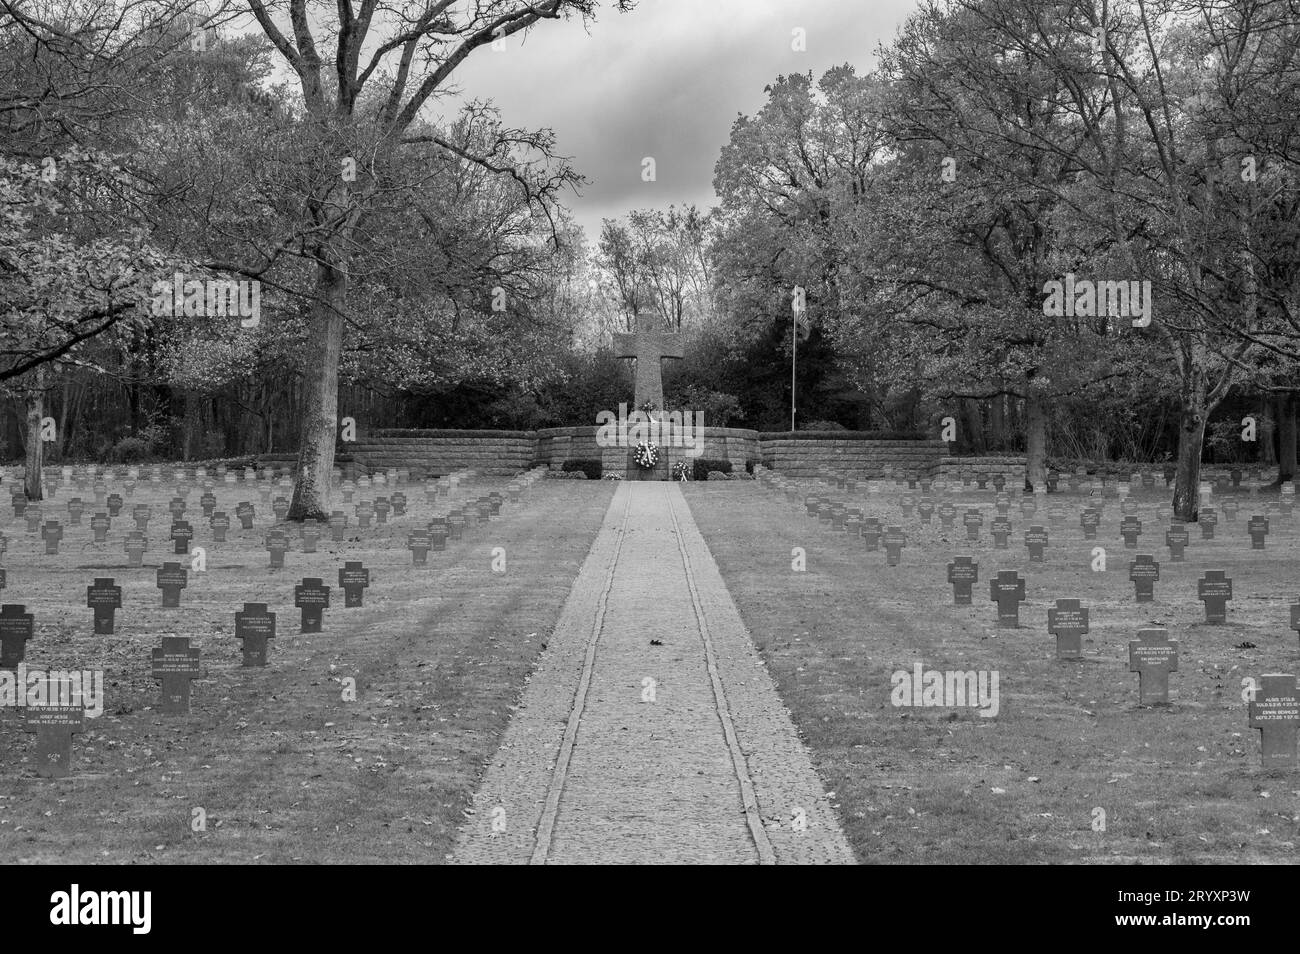 The Sandweiler German war cemetery in Luxembourg. It contains the graves of 10,913 German servicemen fallen in the Battle of the Bulge in 1944–1945. Stock Photo